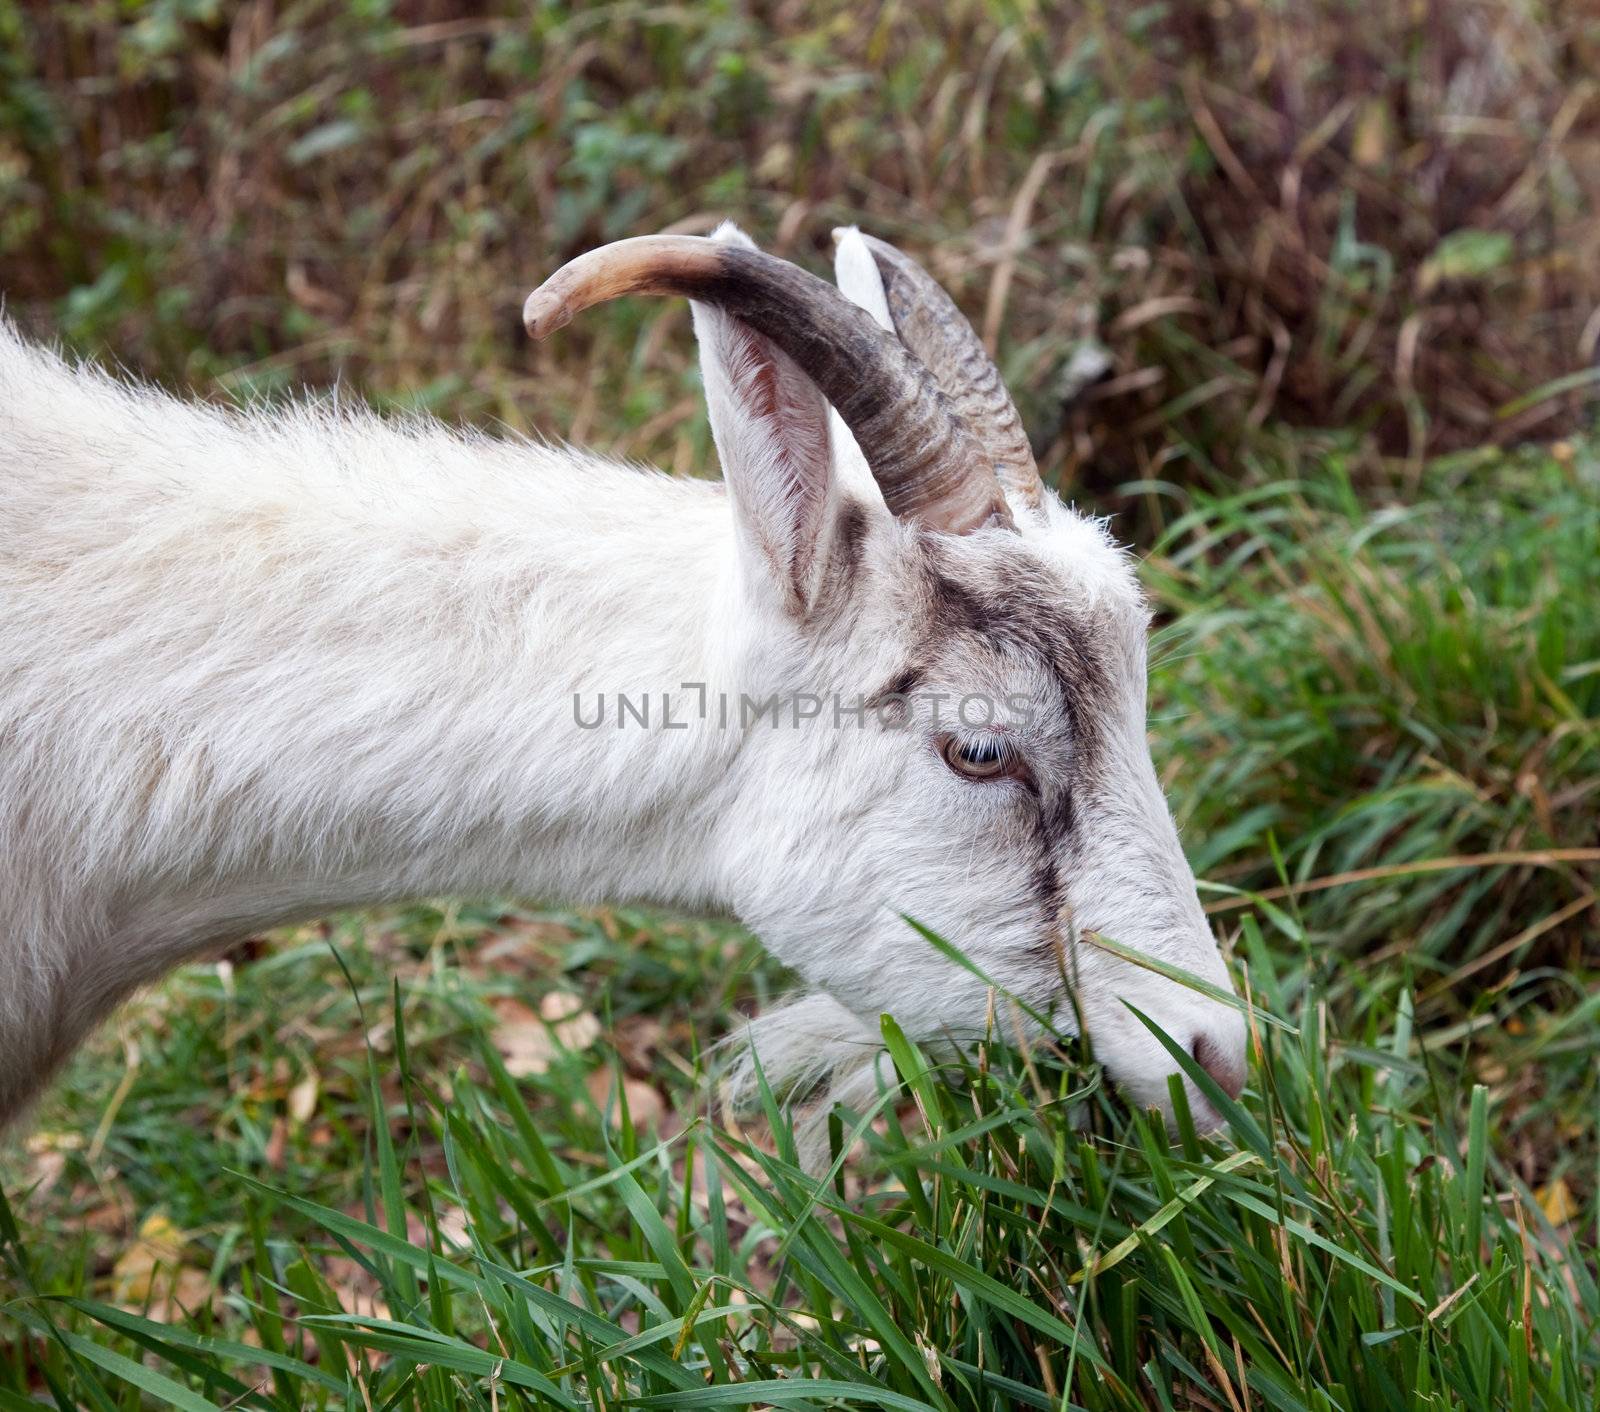 Goat nibbling the grass. Portrait. Close-up.